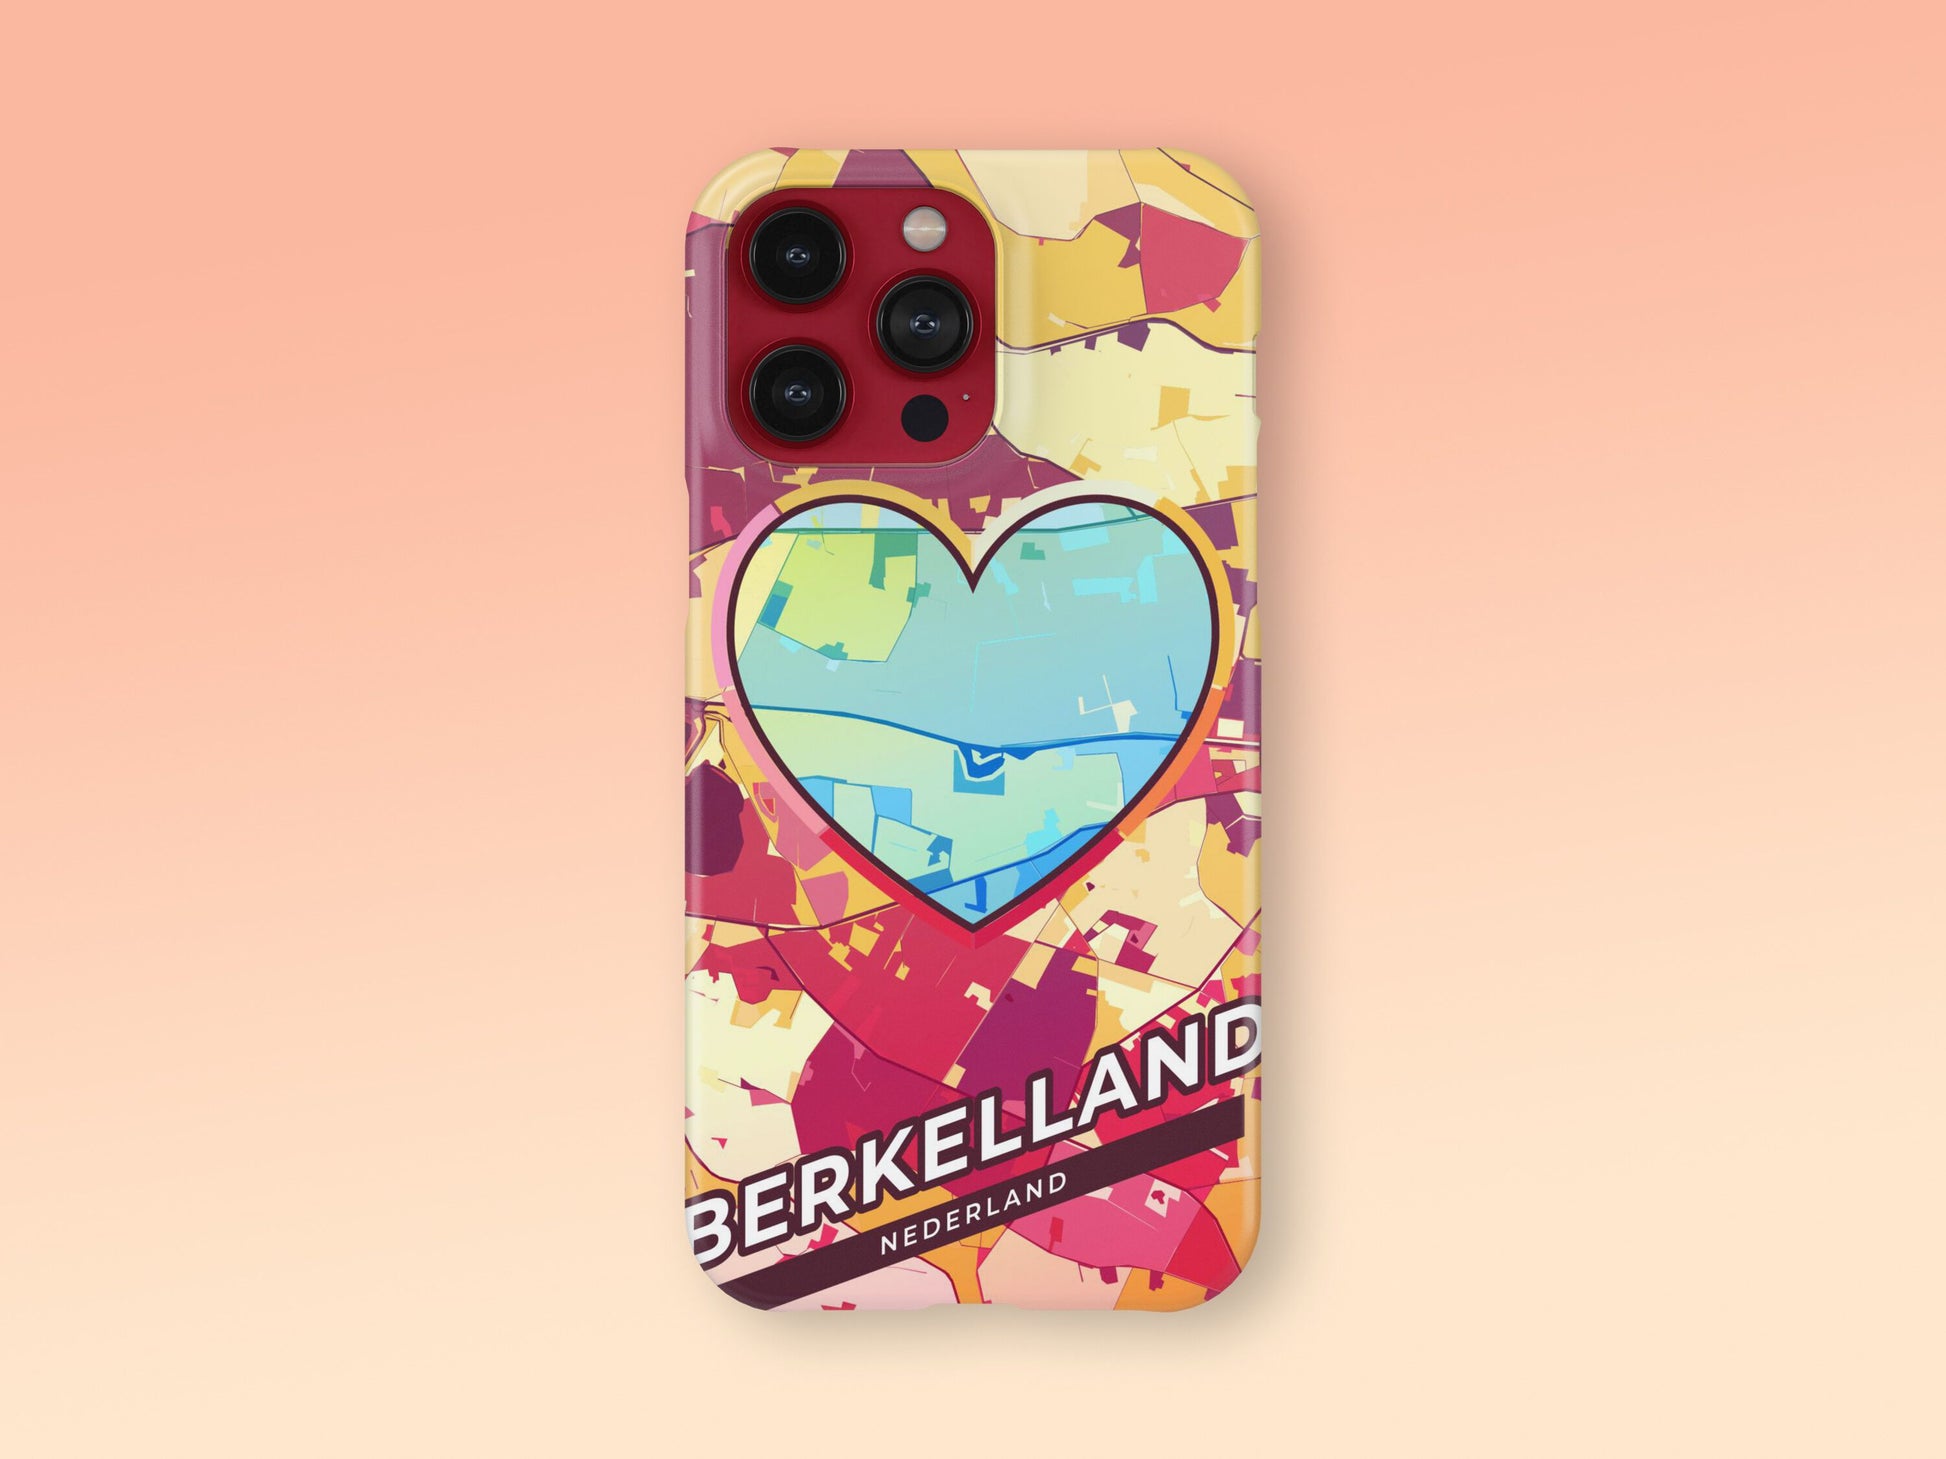 Berkelland Netherlands slim phone case with colorful icon. Birthday, wedding or housewarming gift. Couple match cases. 2